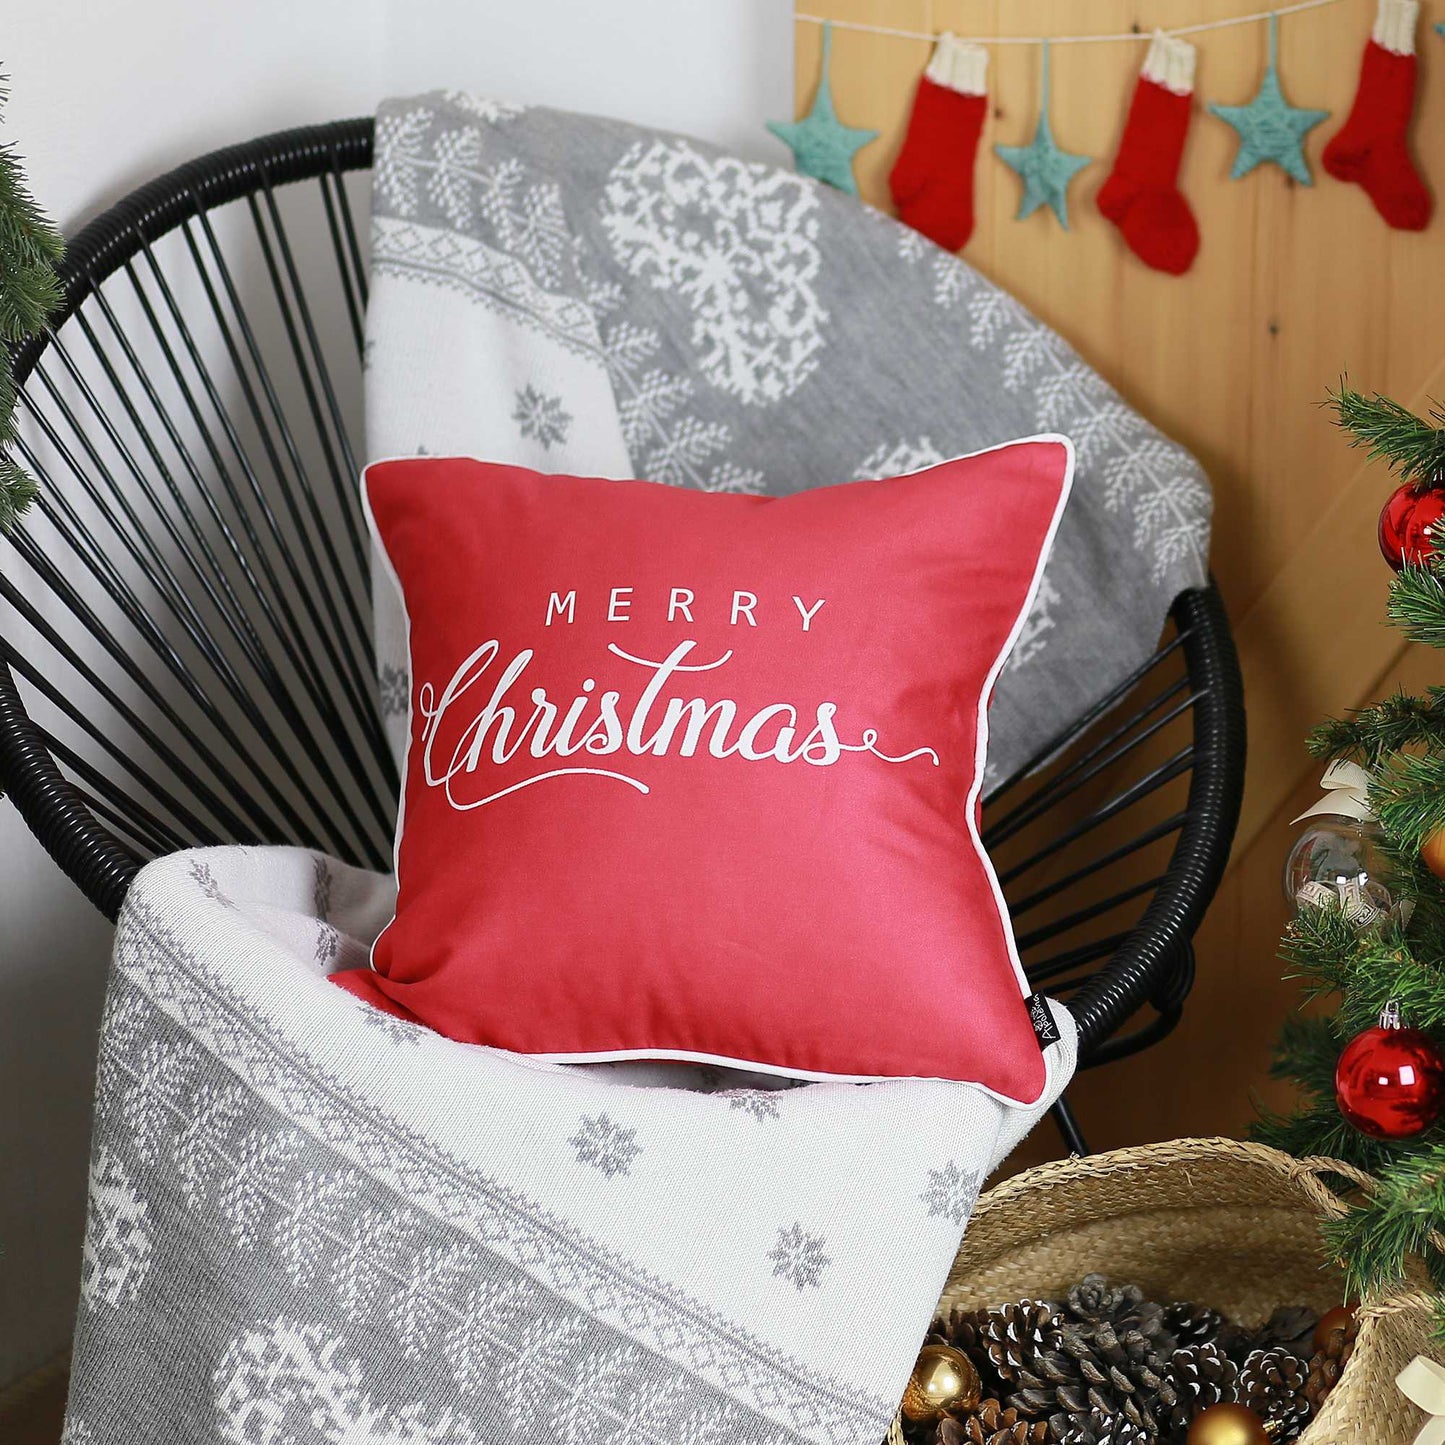 18"x18" White Quote Printed Christmas Decorative Throw Pillow Cover